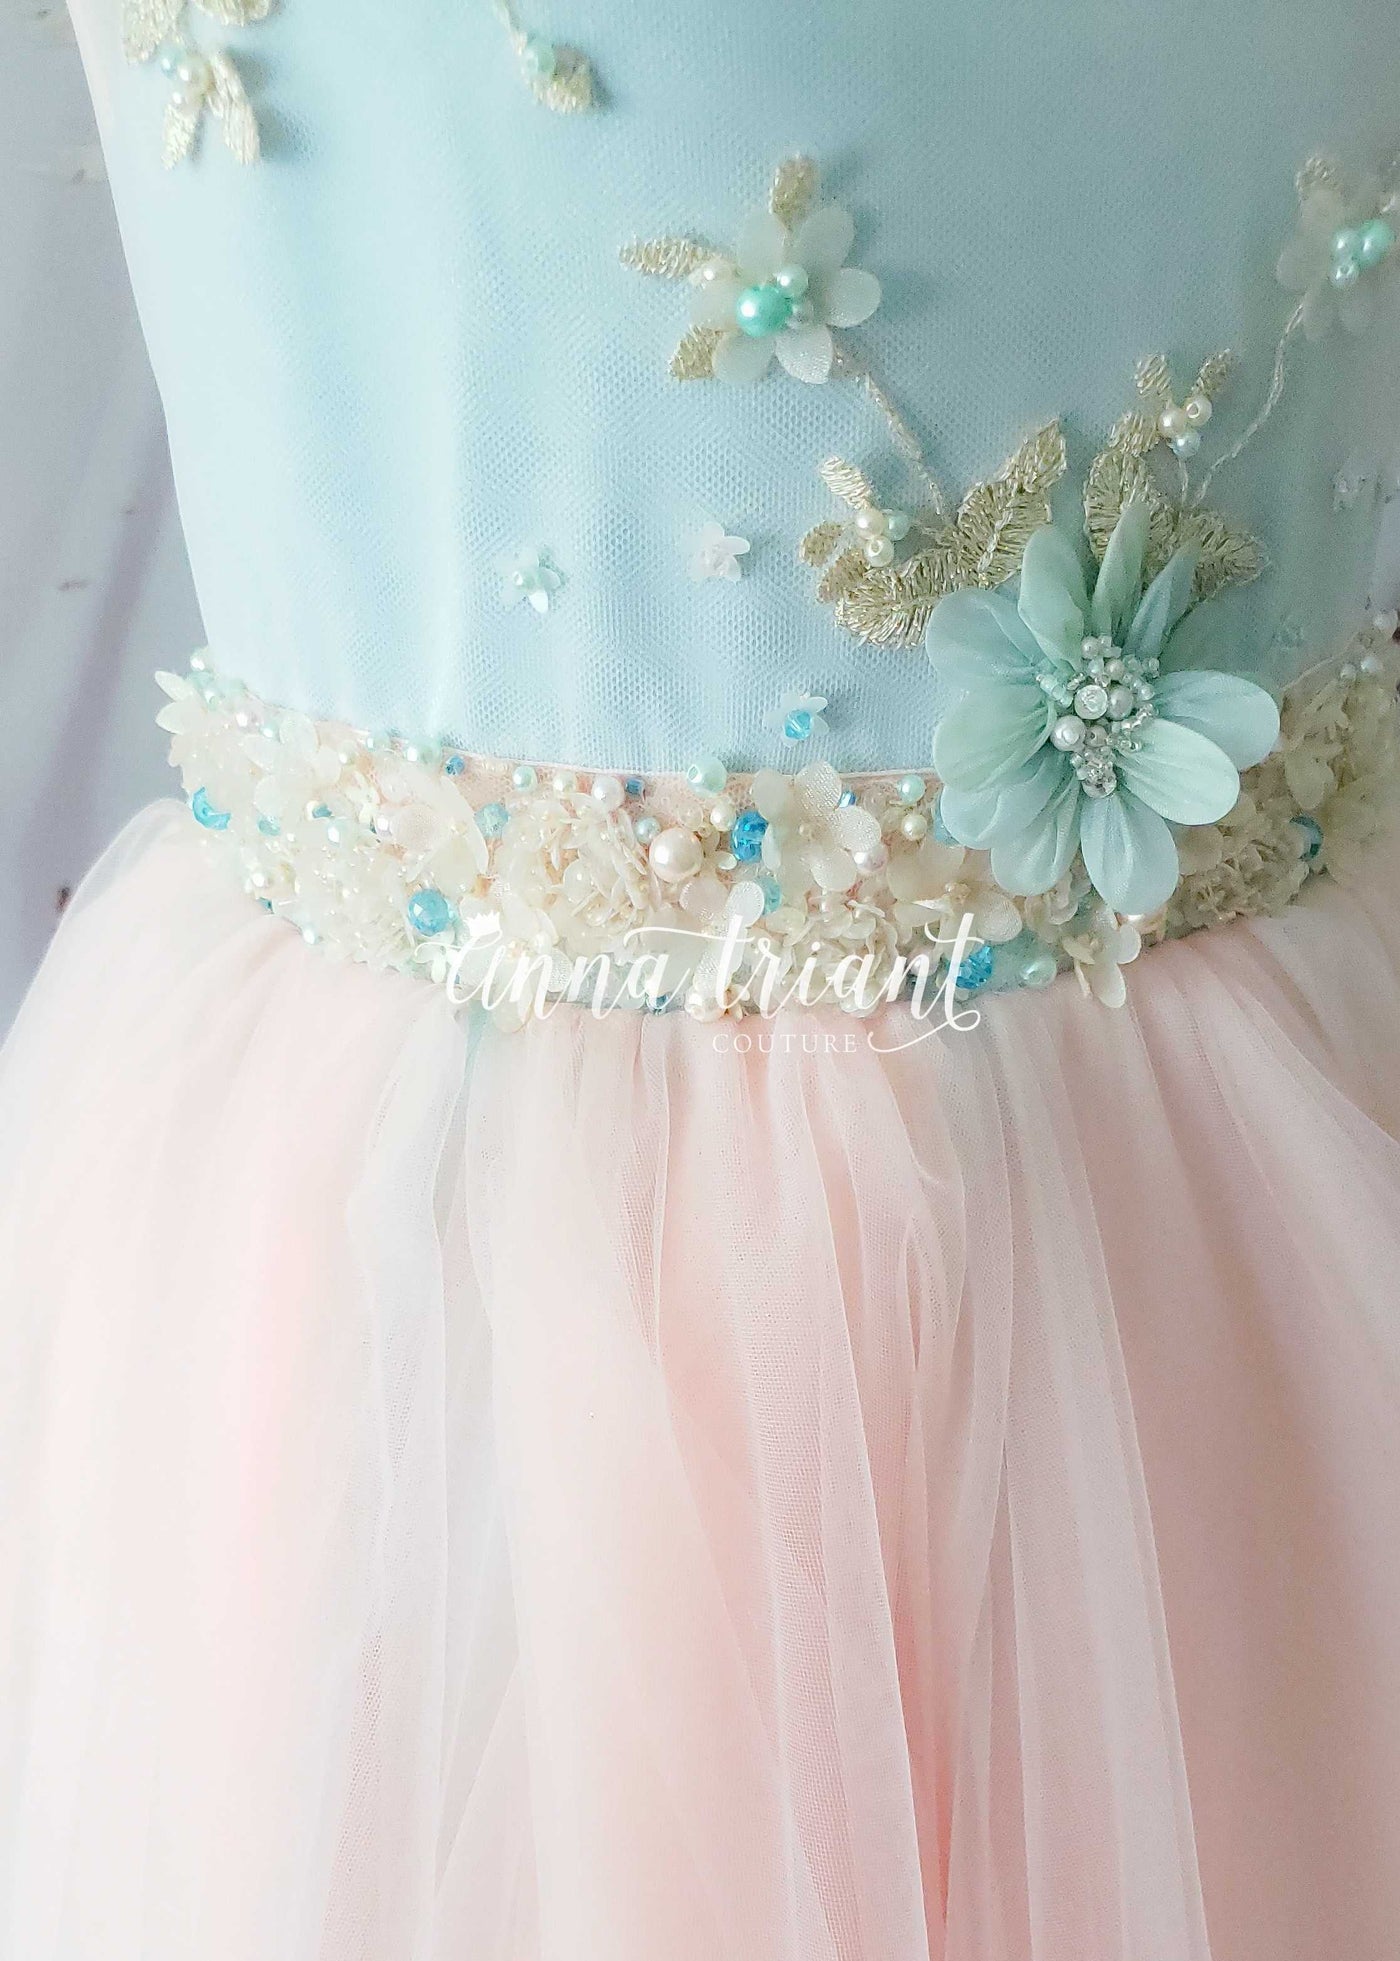 Minty Peach Ombre Gown